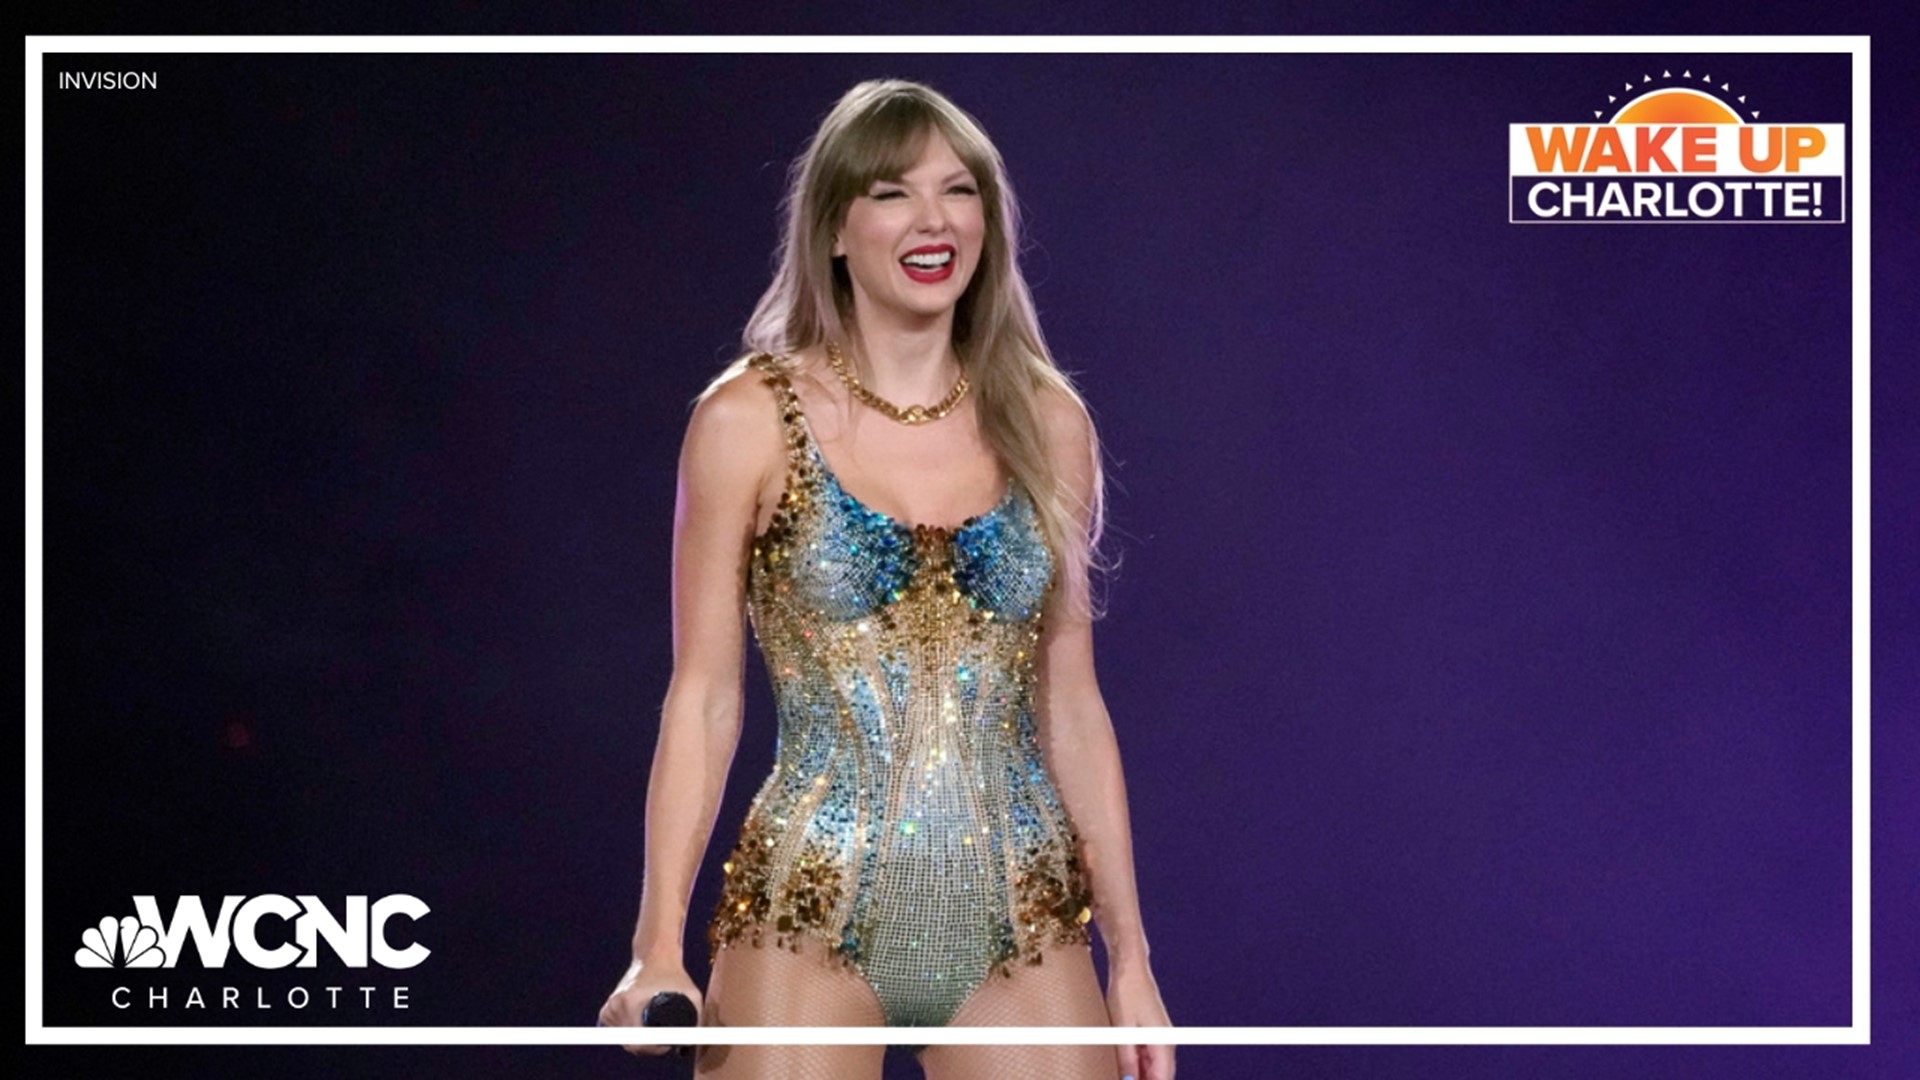 Taylor Swift announced a new version of her "1989" album, but unless you were a Swiftie, you might be wondering why she's redoing all of her old music.